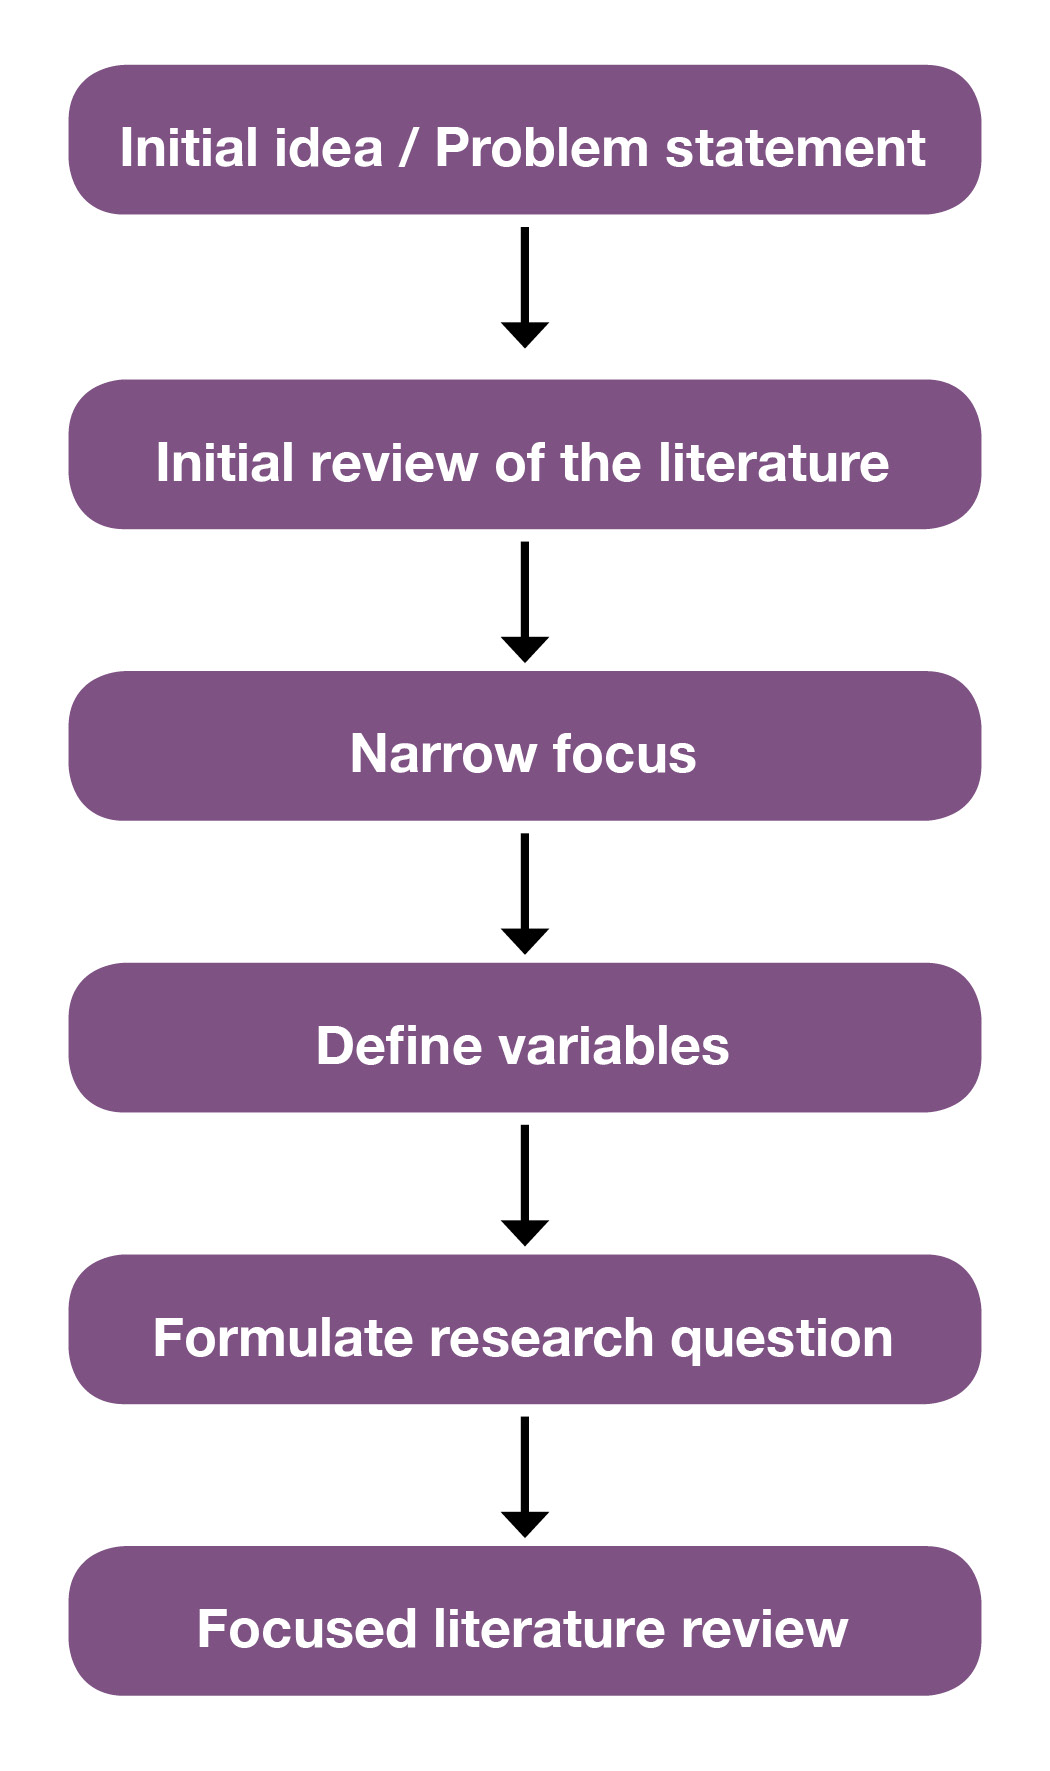 Figure 3.2 shows six boxes labelled with the basic steps in the literature review process, from the initial idea and development of a problem statement to an initial review of the literature. After narrowing focus and define variables, the research question is formulated and the focused literature review begins.